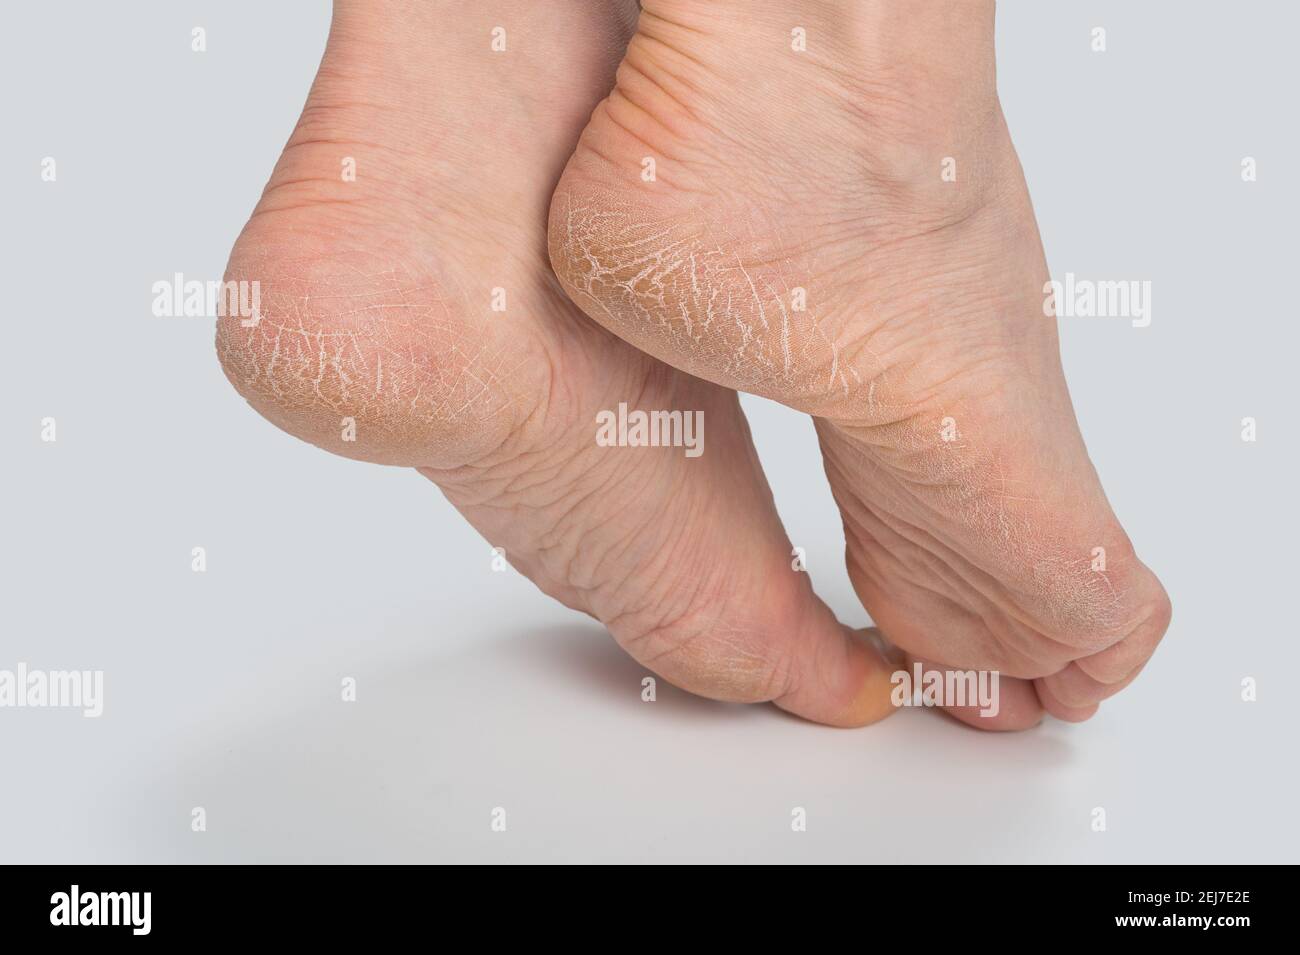 Dry and cracked soles of feet on white background, womans feet with dry heels, cracked skin. Close up of Cracks on Heels with bad skin covered. Health Stock Photo